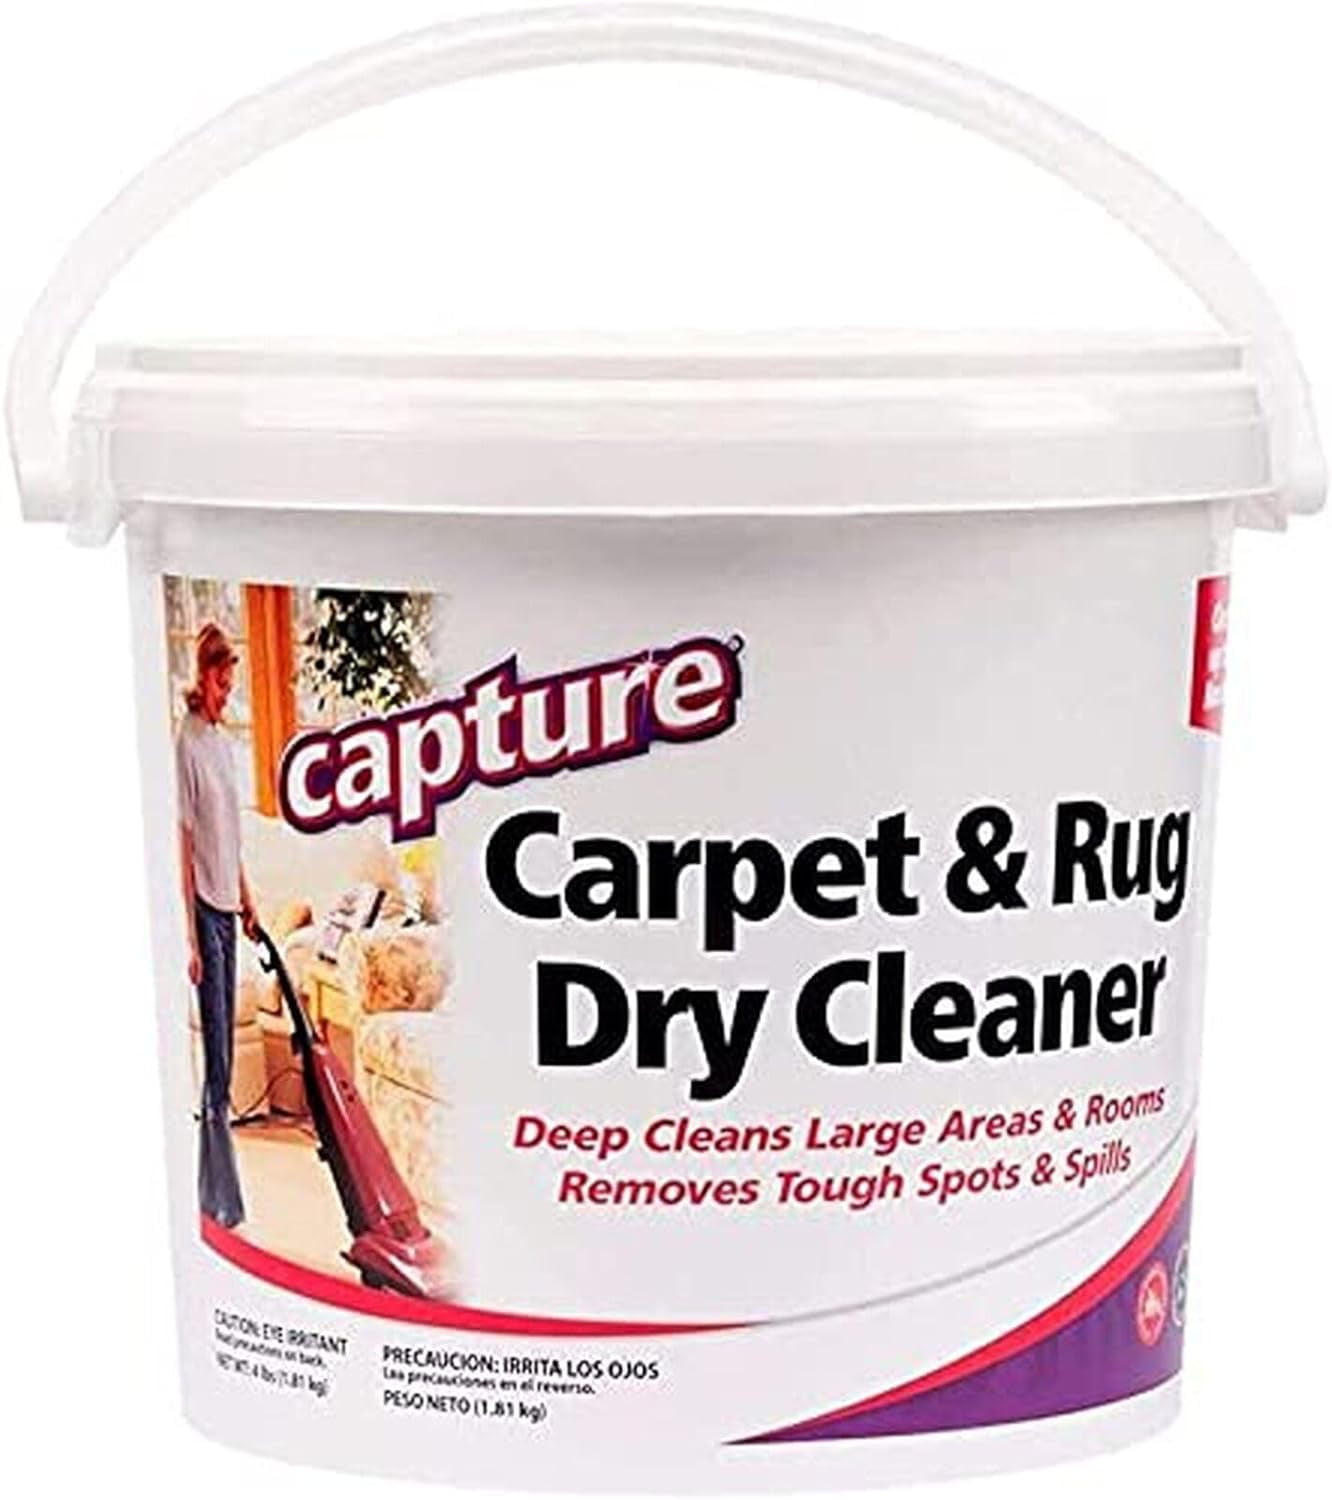 Dry Carpet Cleaning Powder Recalled Due to Bacteria Contamination